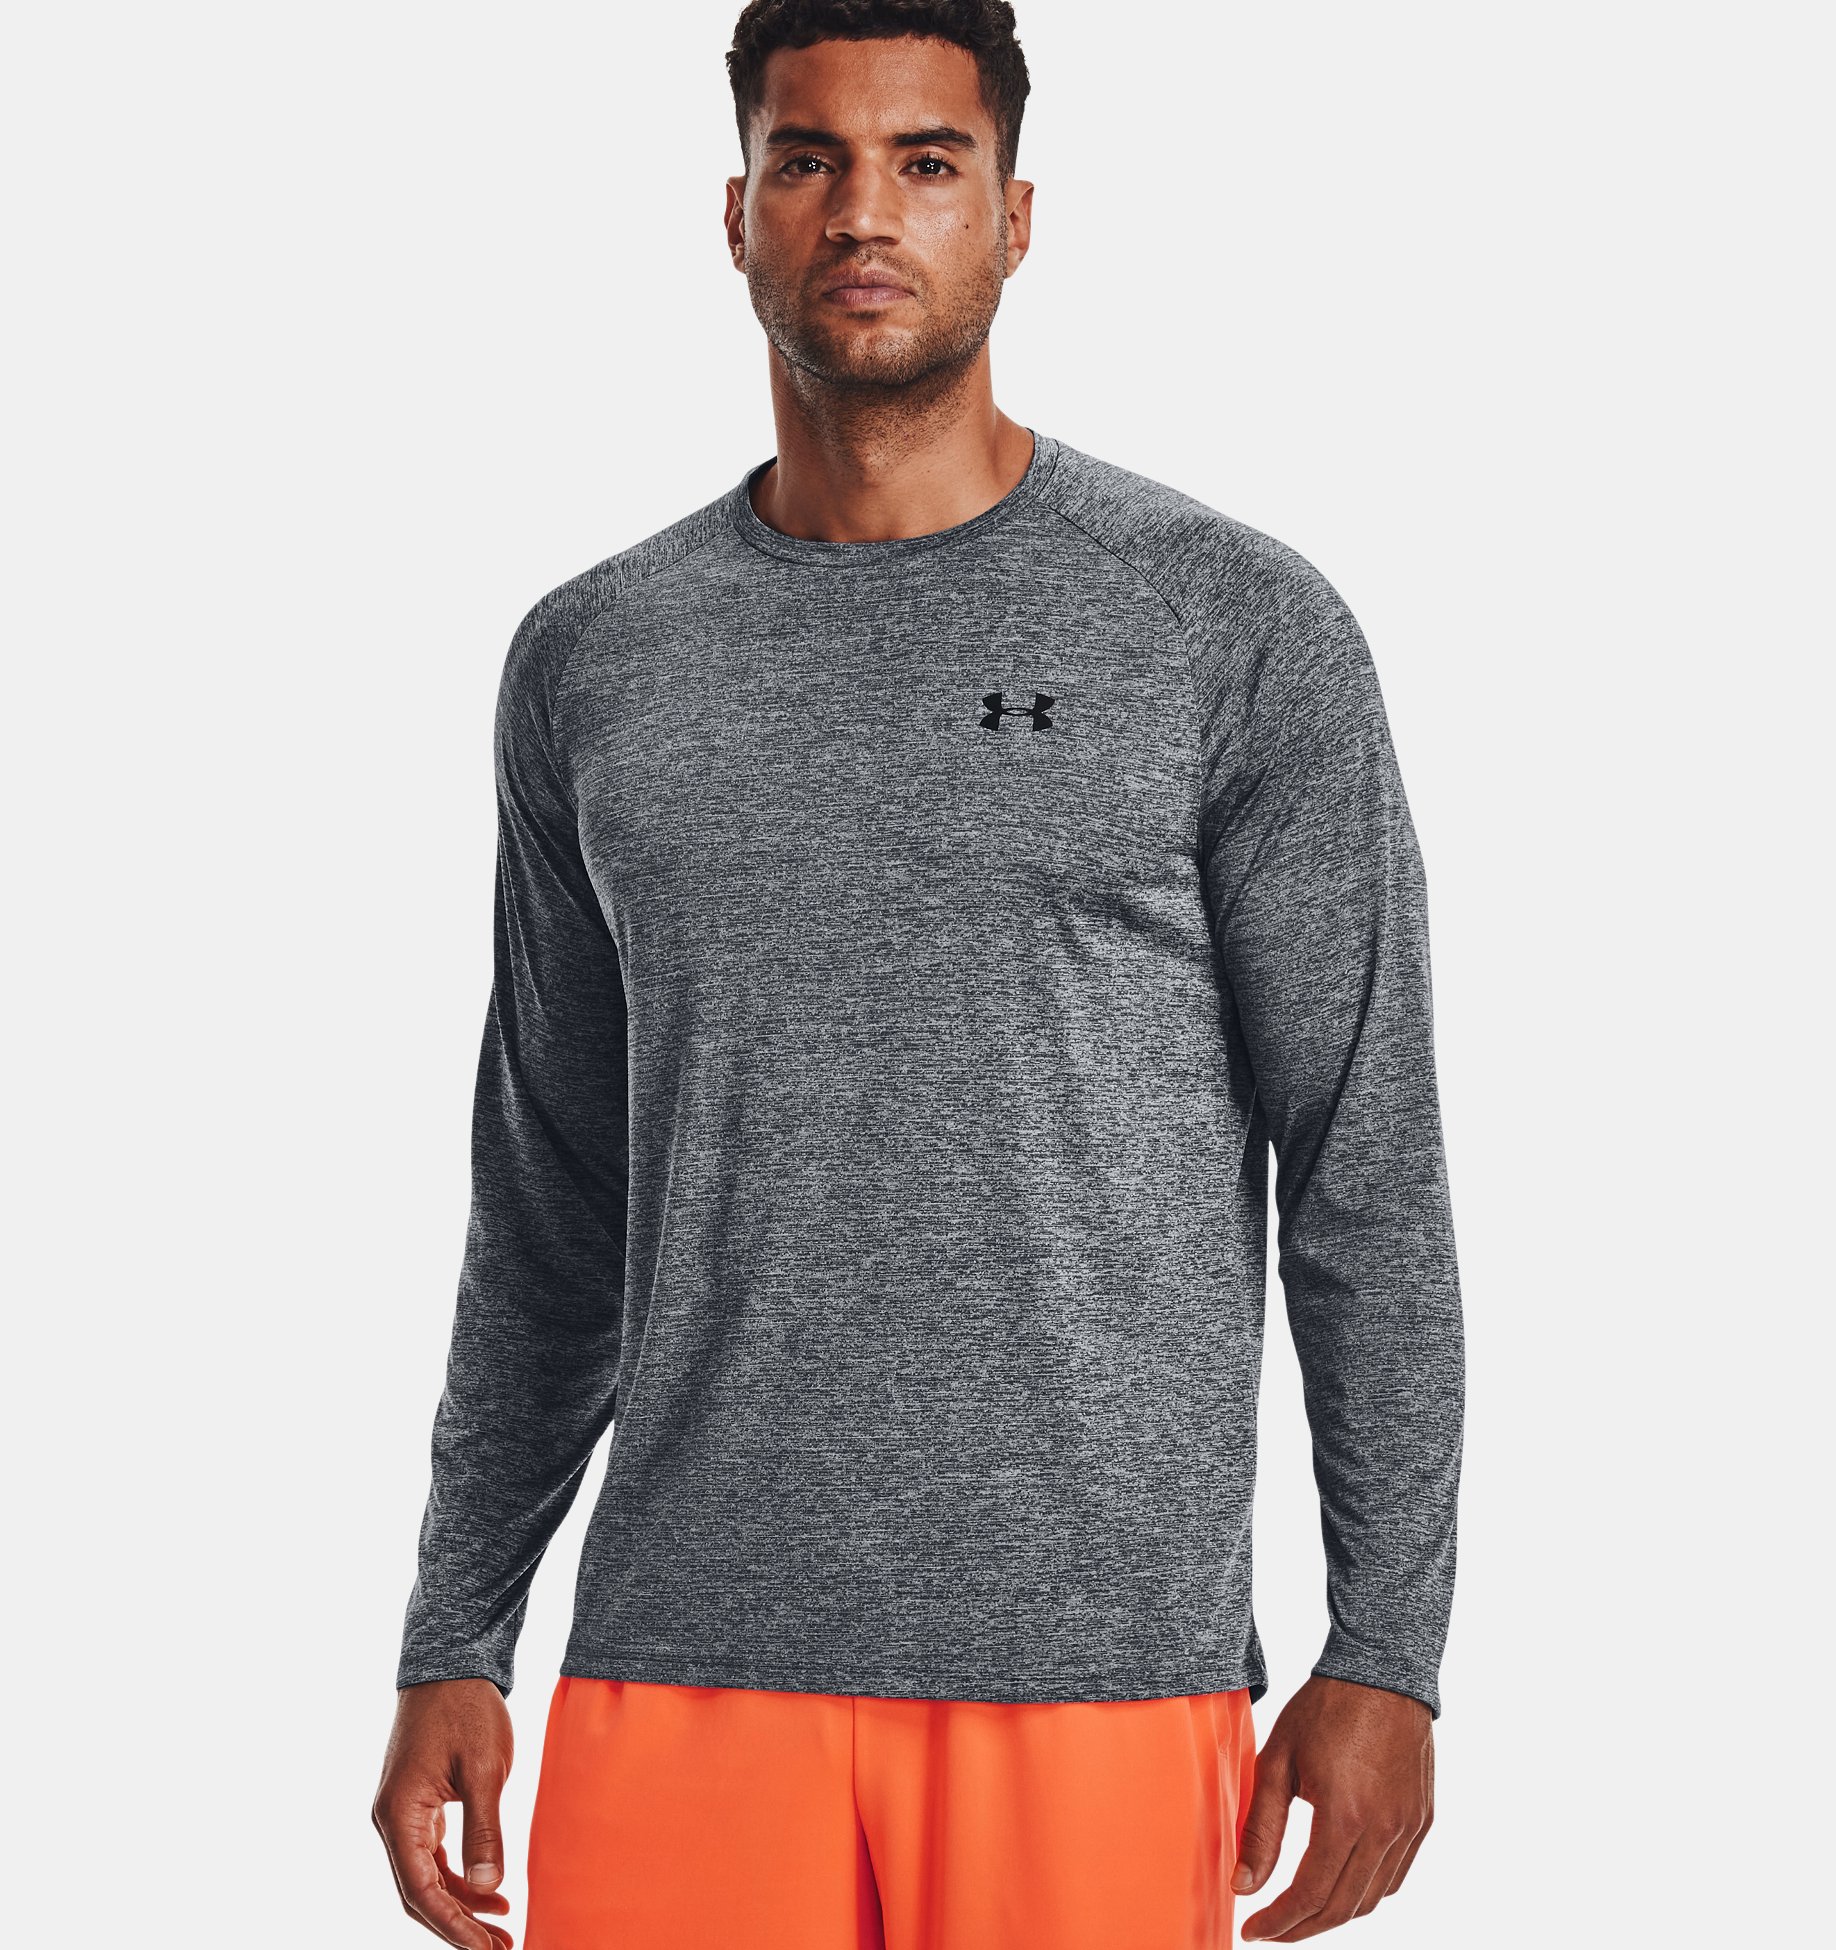 M Black & White Under Armour Loose Fit Heat Gear Shirt New Mens Gray 